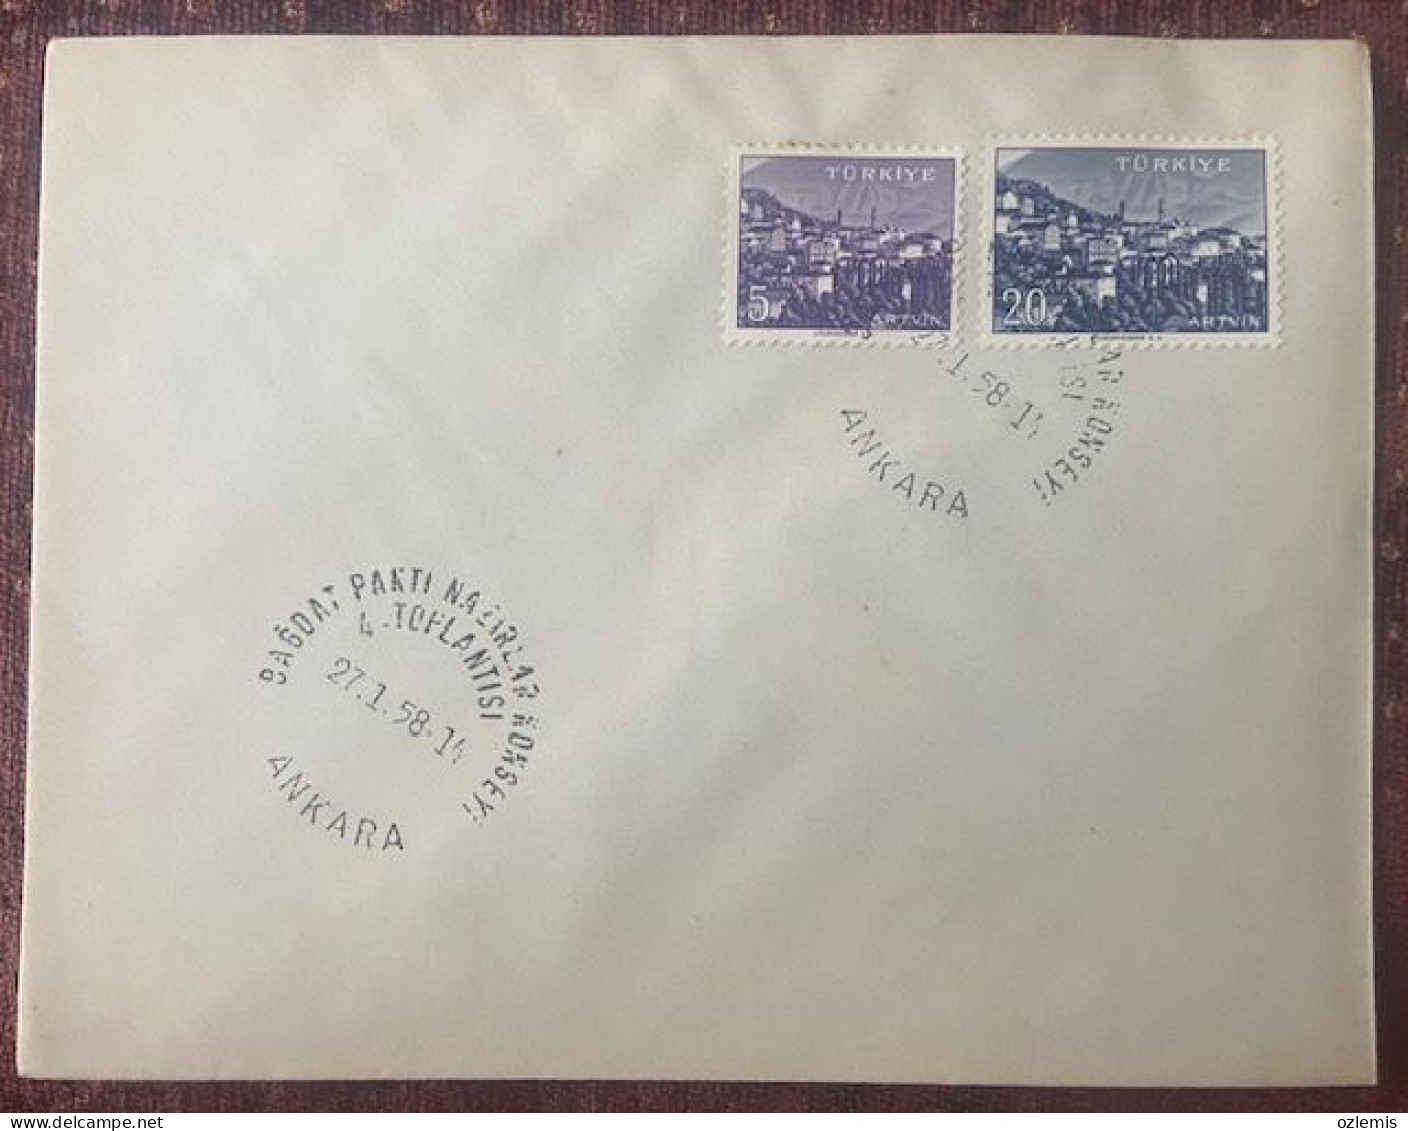 TURKEY,TURKEI,TURQUIE ,ARTVIN  ,STAMP,THE 4TH MEETING OF THE BAGDAT PACT ,1958 ,COVER - Briefe U. Dokumente